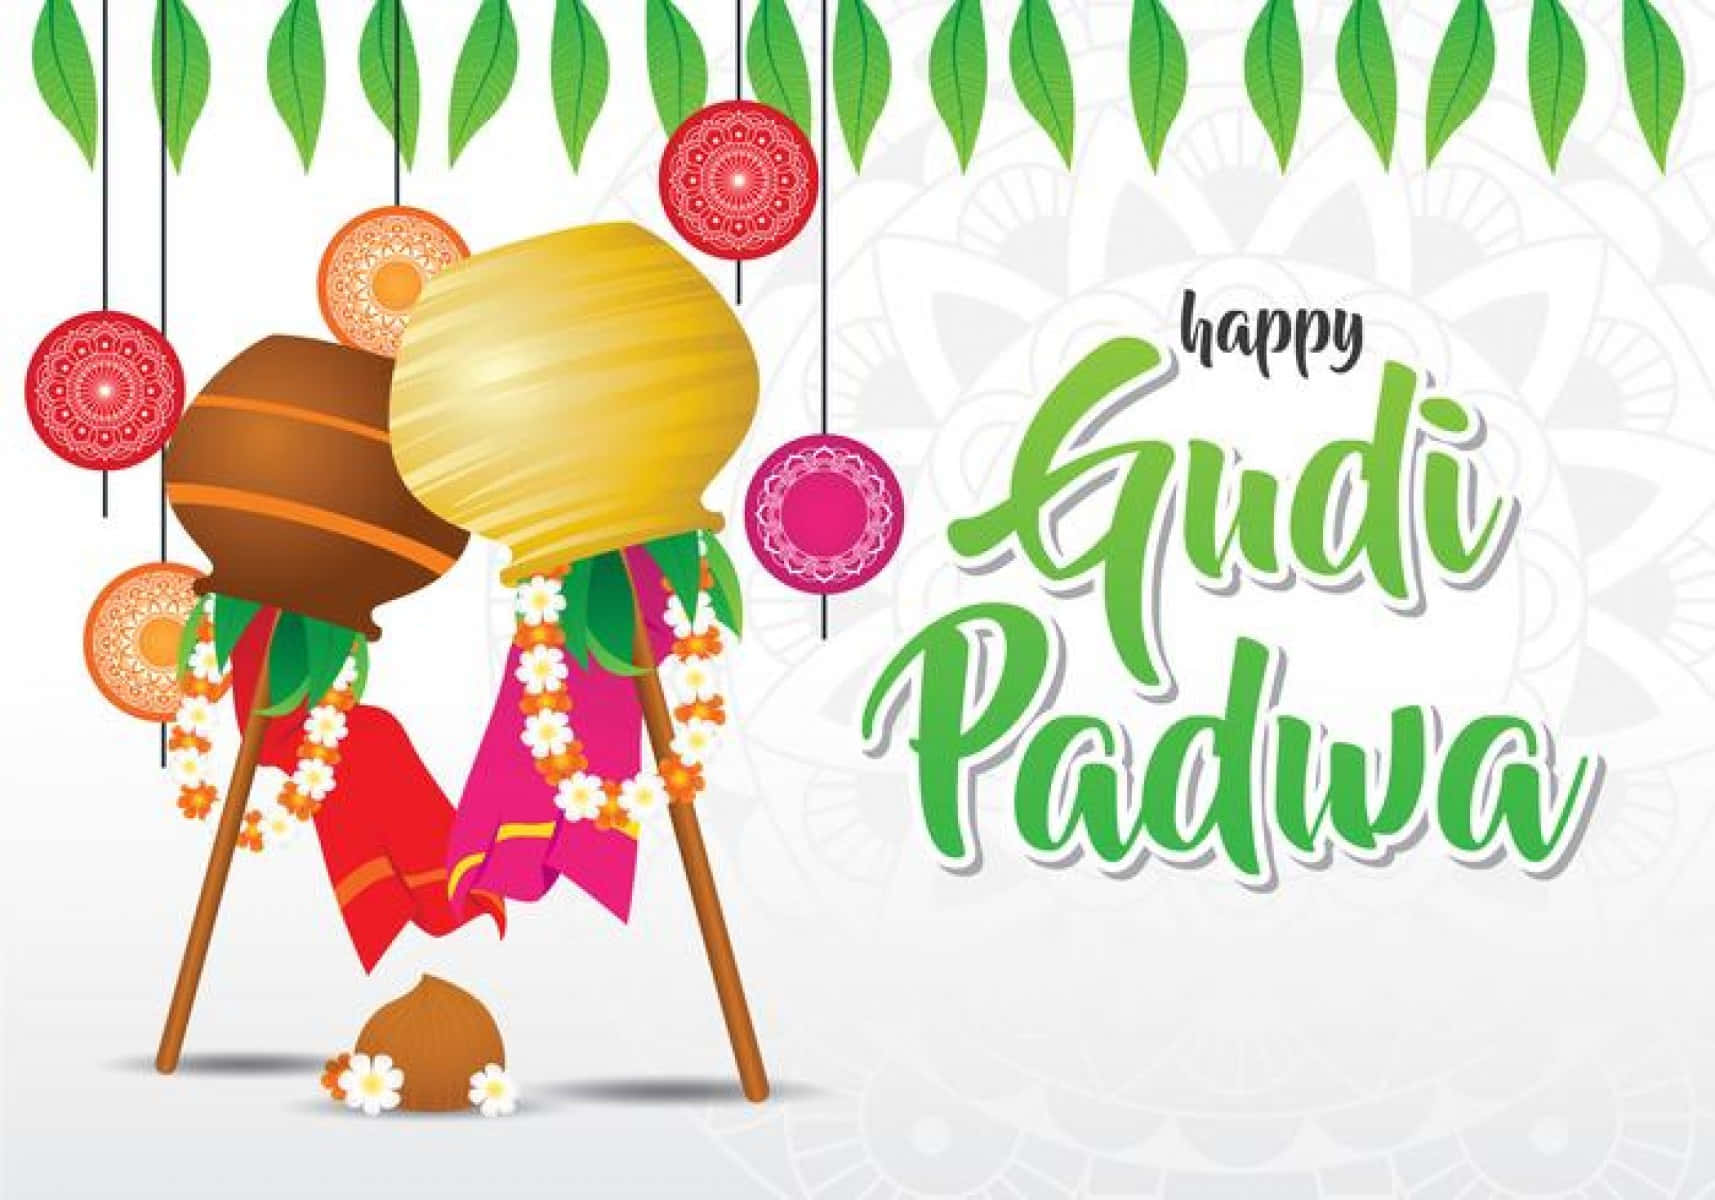 Celebrate Gudi Padwa with family and friends!